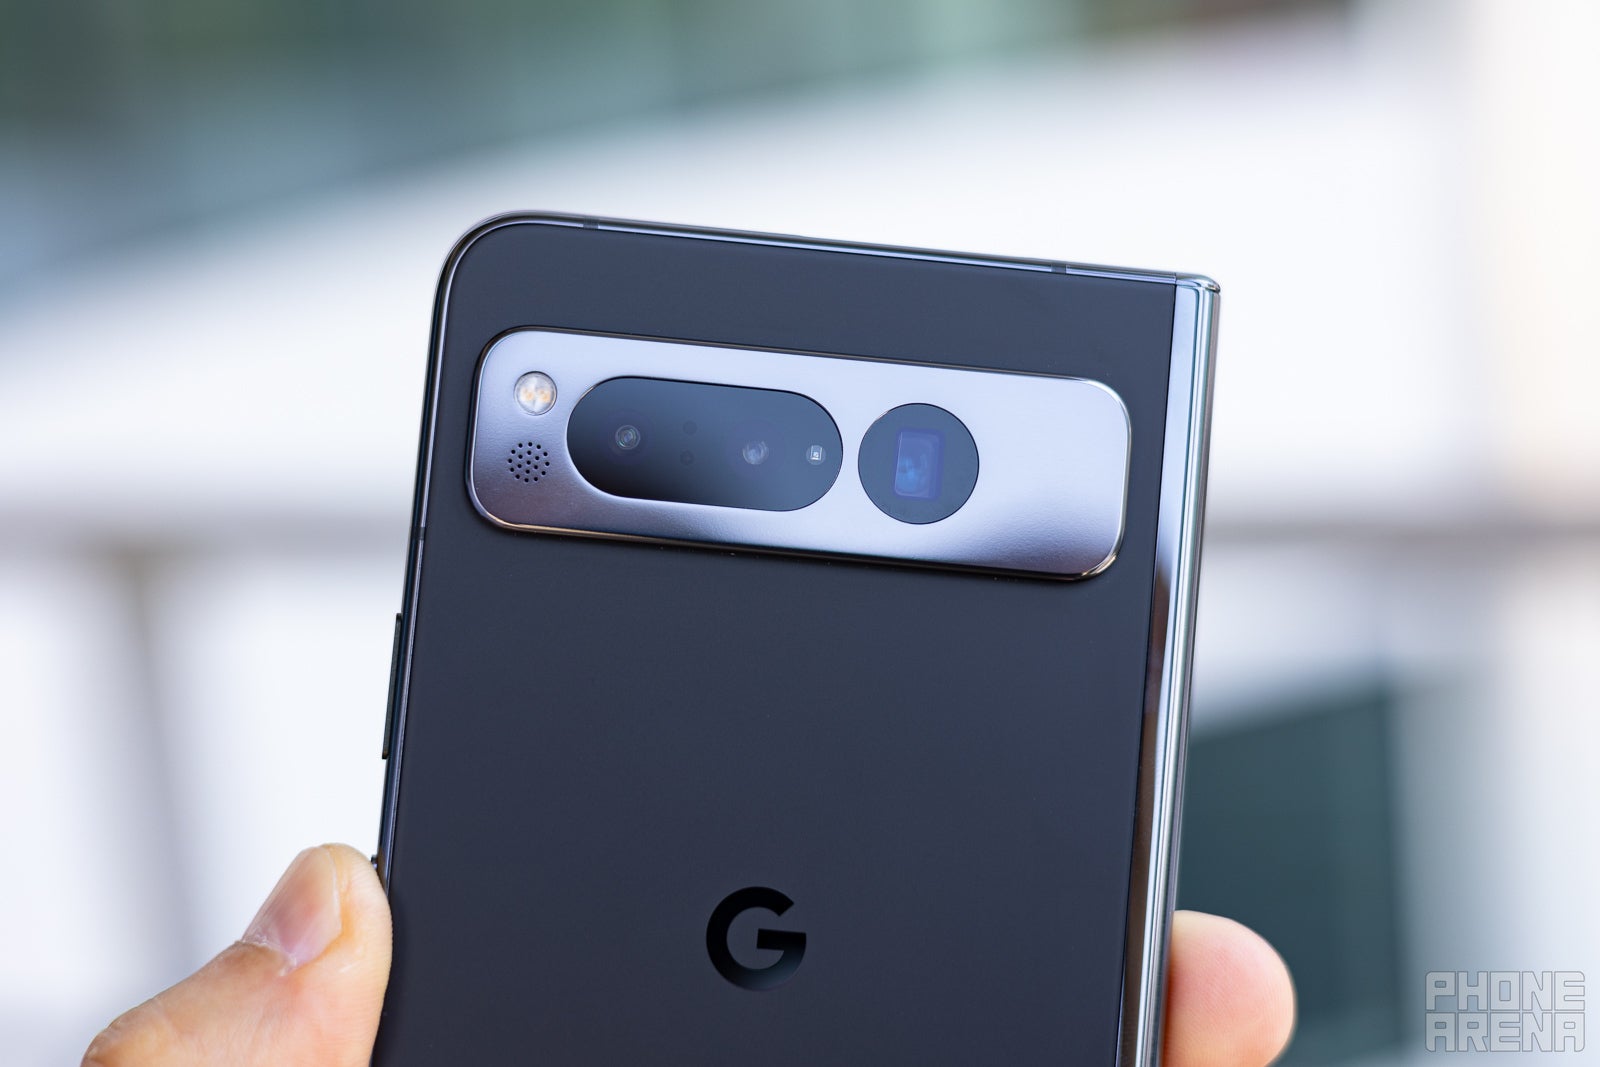 Triple rear camera with 5X optical zoom - Google Pixel Fold Review: finally, a folding phone you can enjoy using even without unfolding